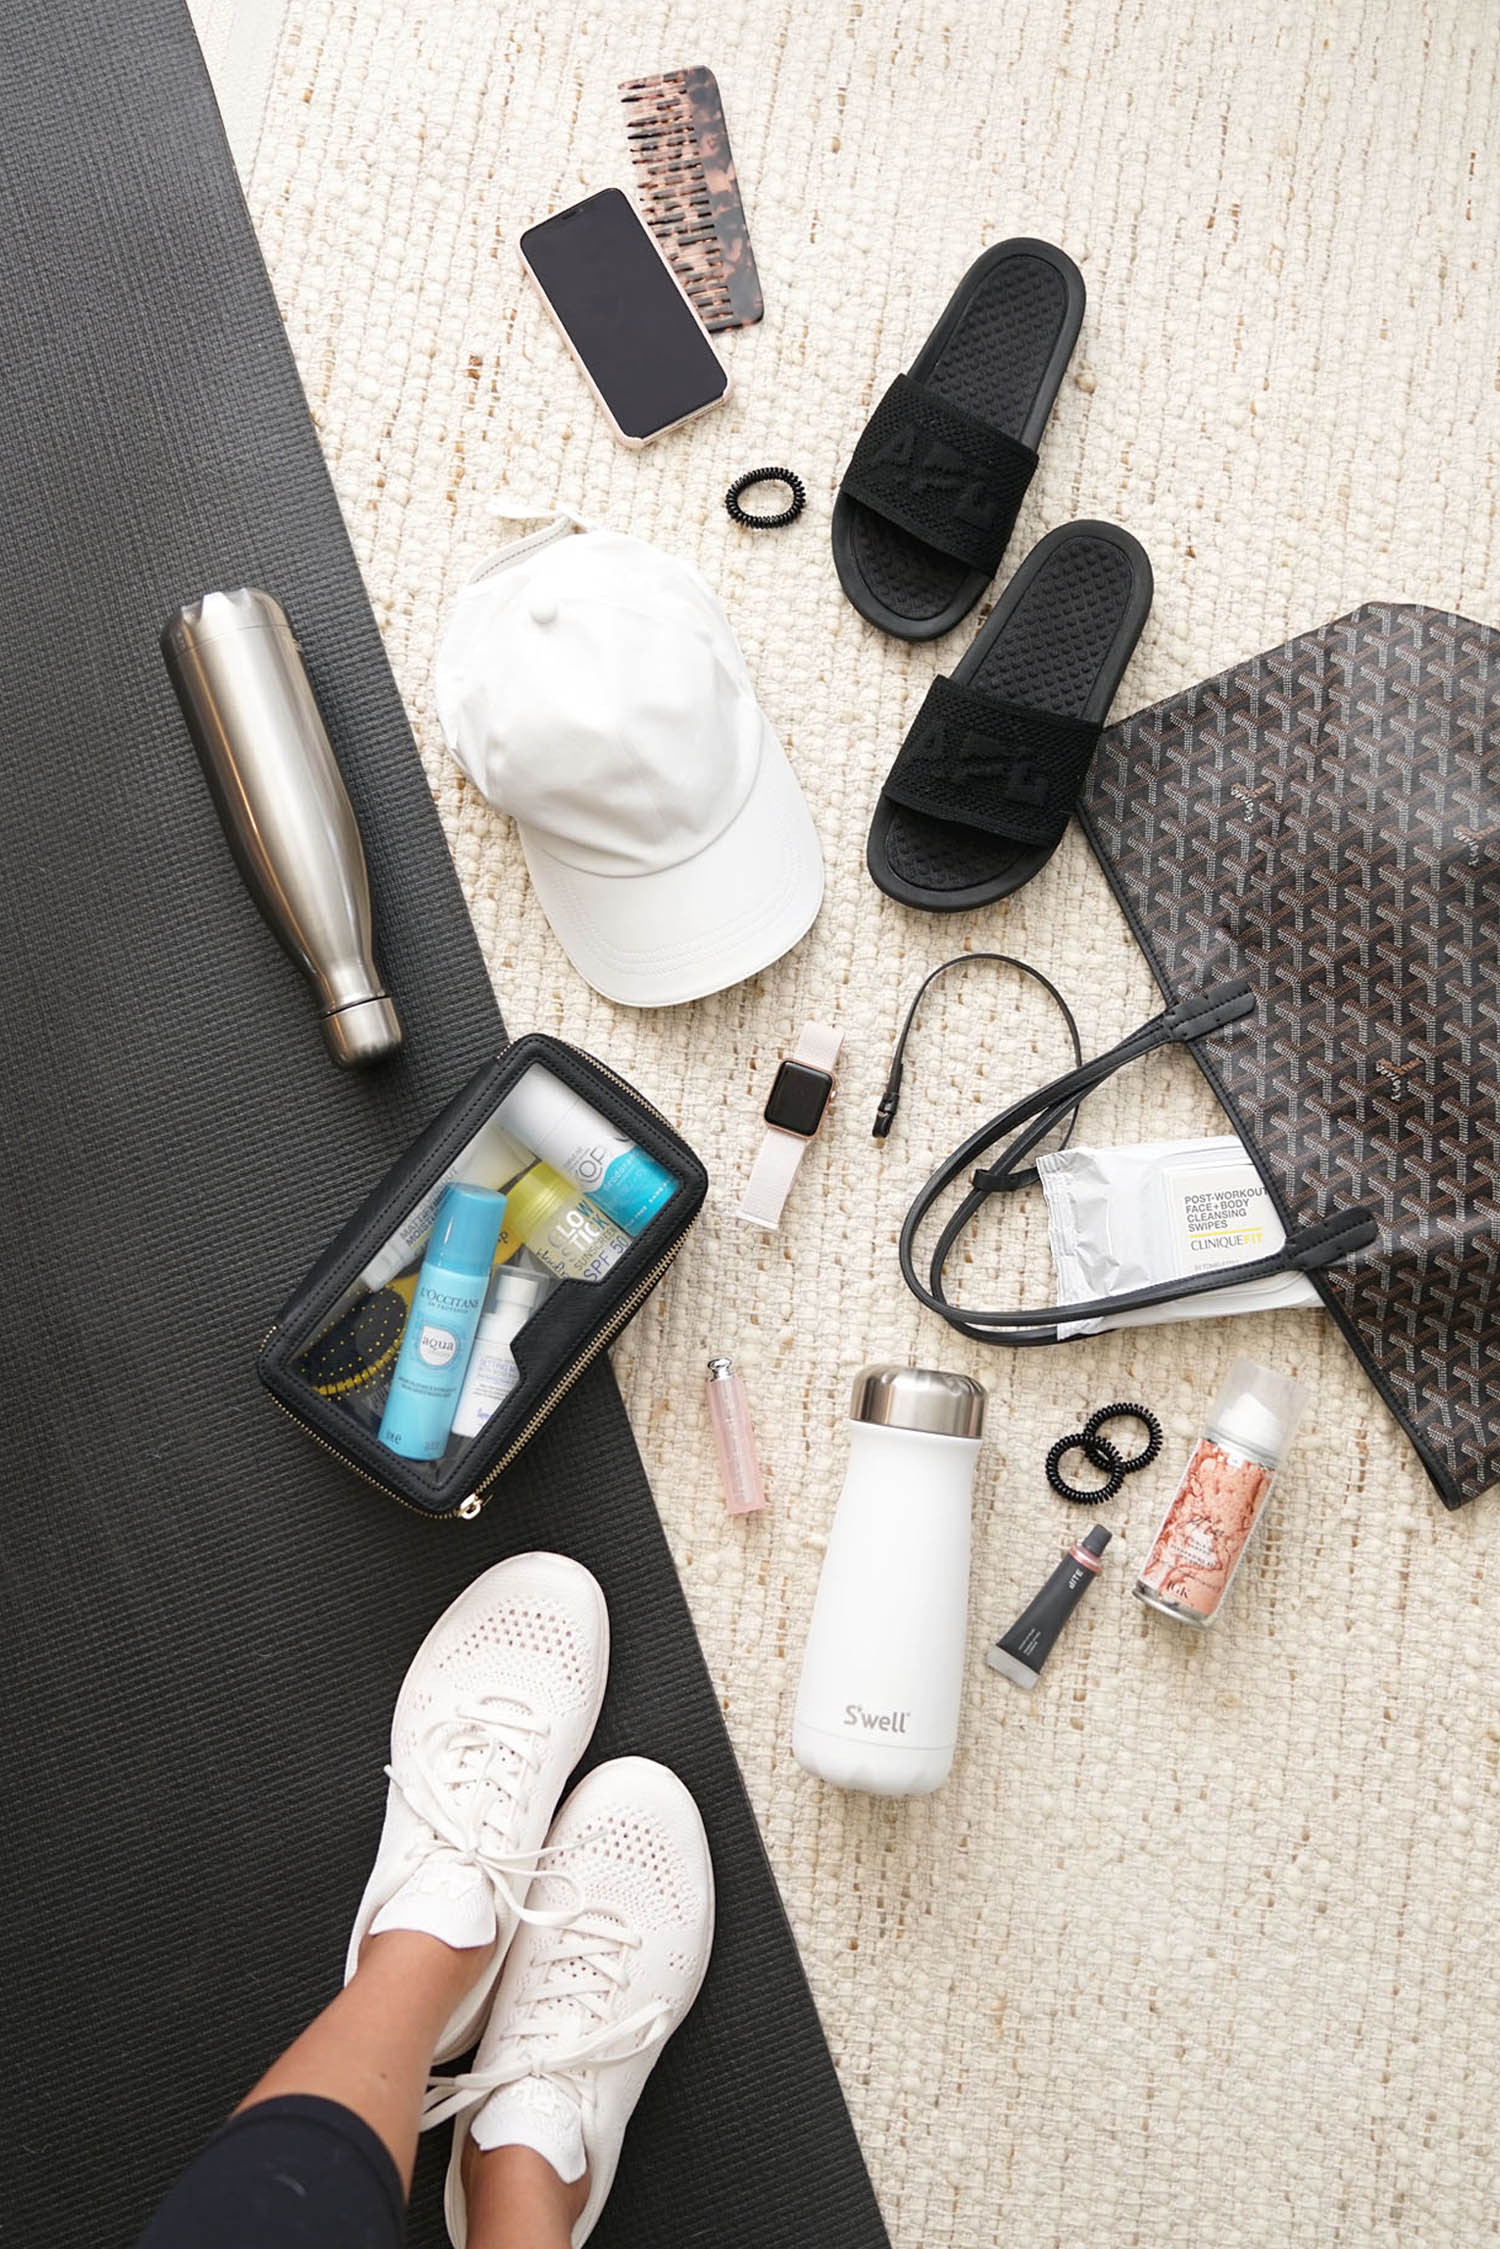 Gym Bag Beauty Essentials - The Beauty Look Book